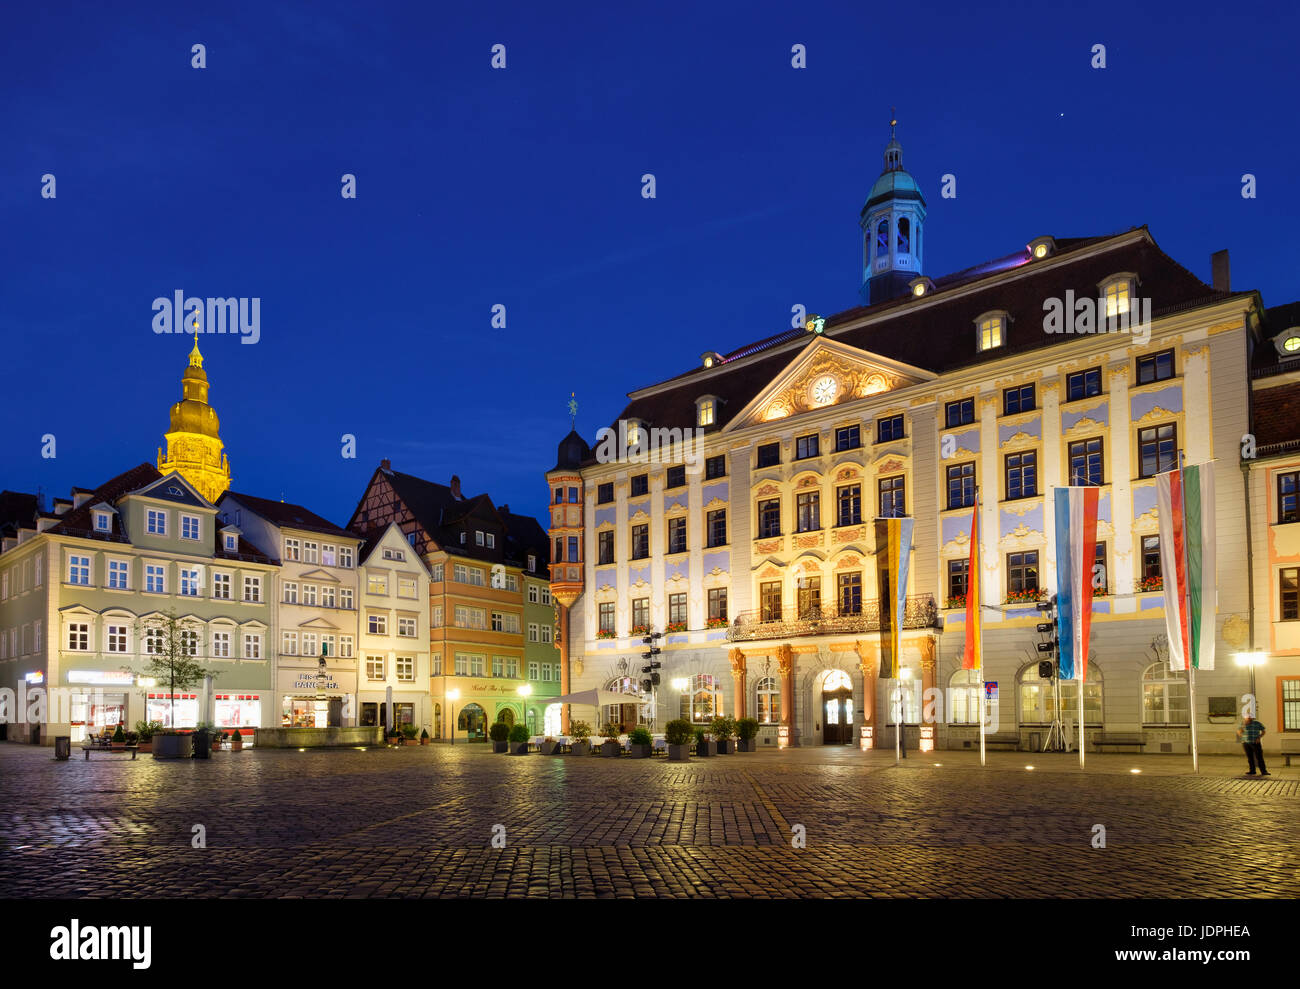 Town Hall on the market square with church St. Moritz, Coburg, Upper Franconia, Franconia, Bavaria, Germany Stock Photo